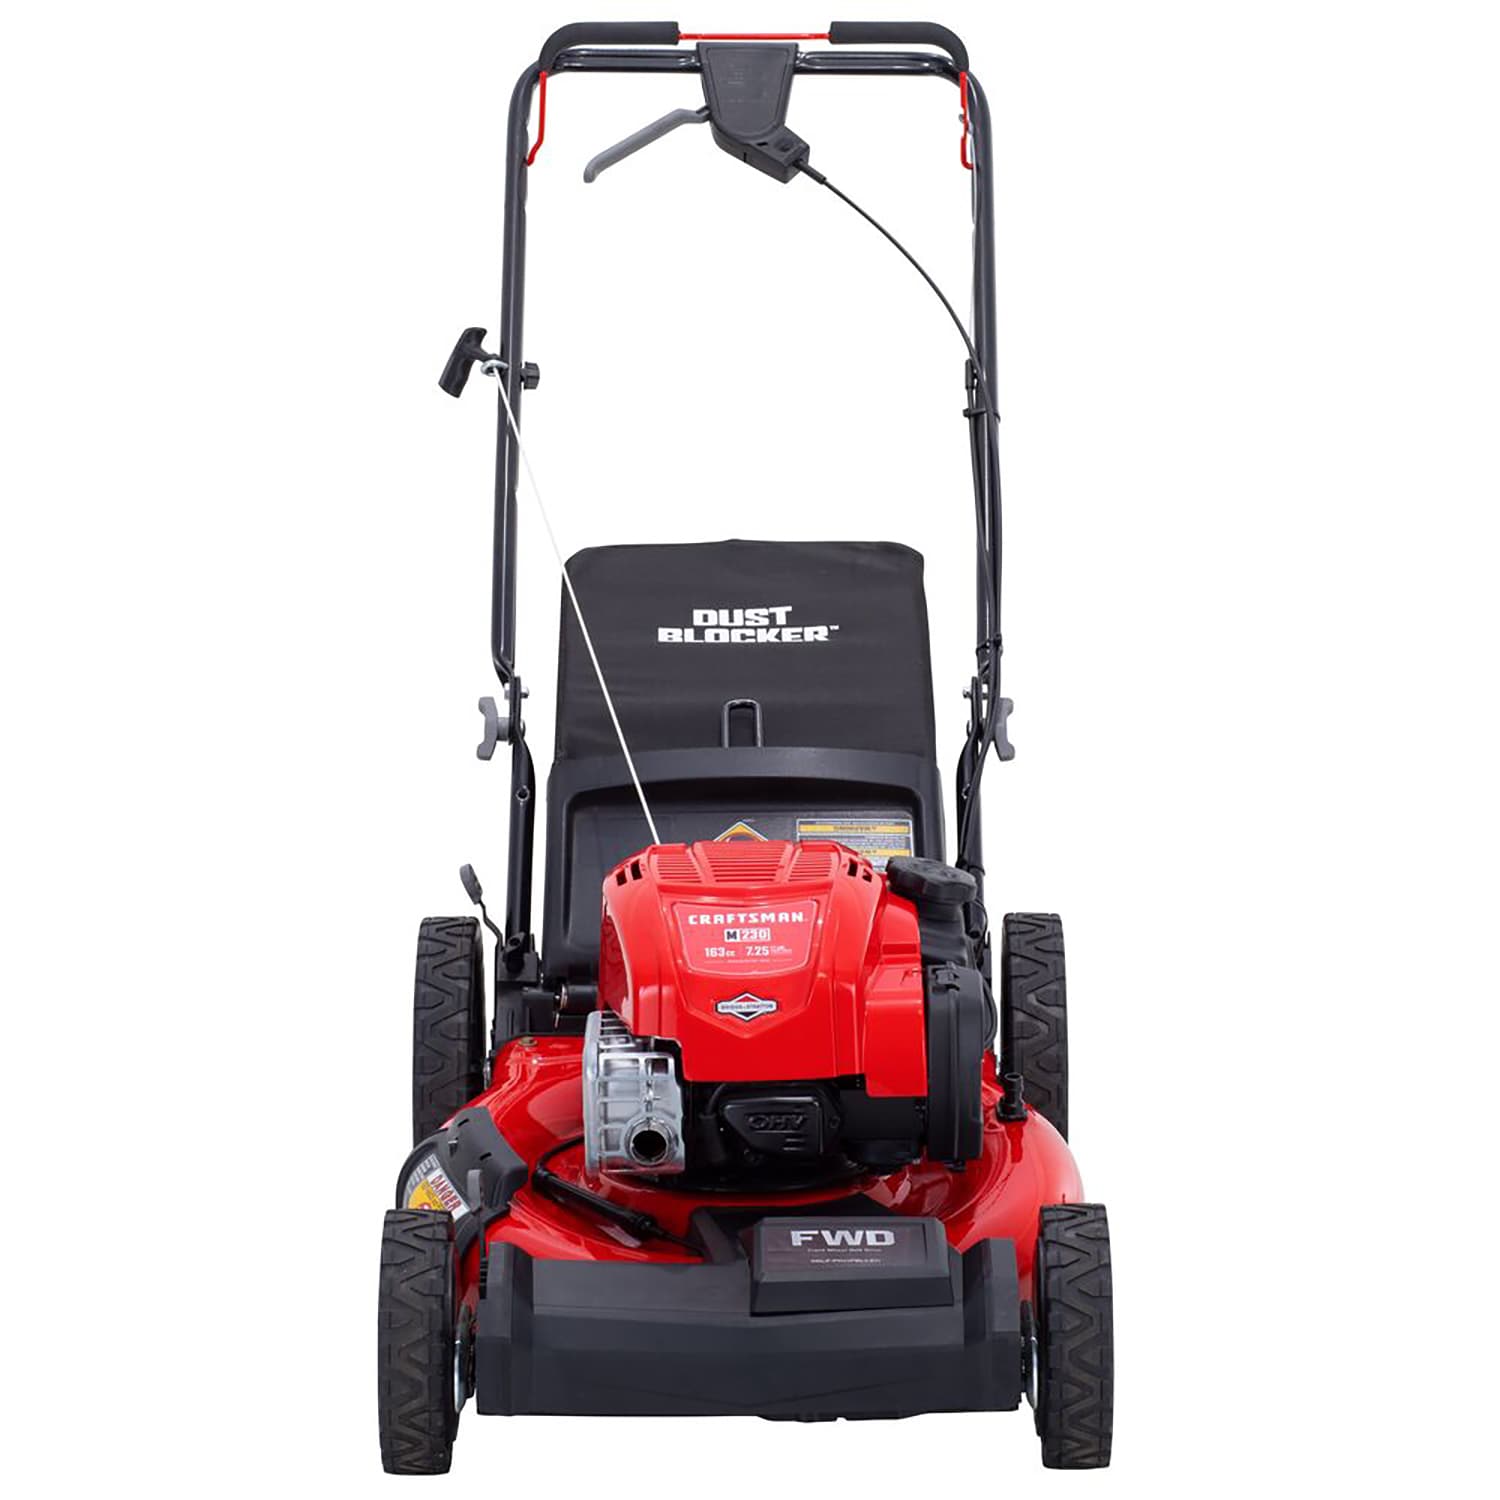 CRAFTSMAN M230 21-in Gas Self-propelled Lawn Mower with 163-cc